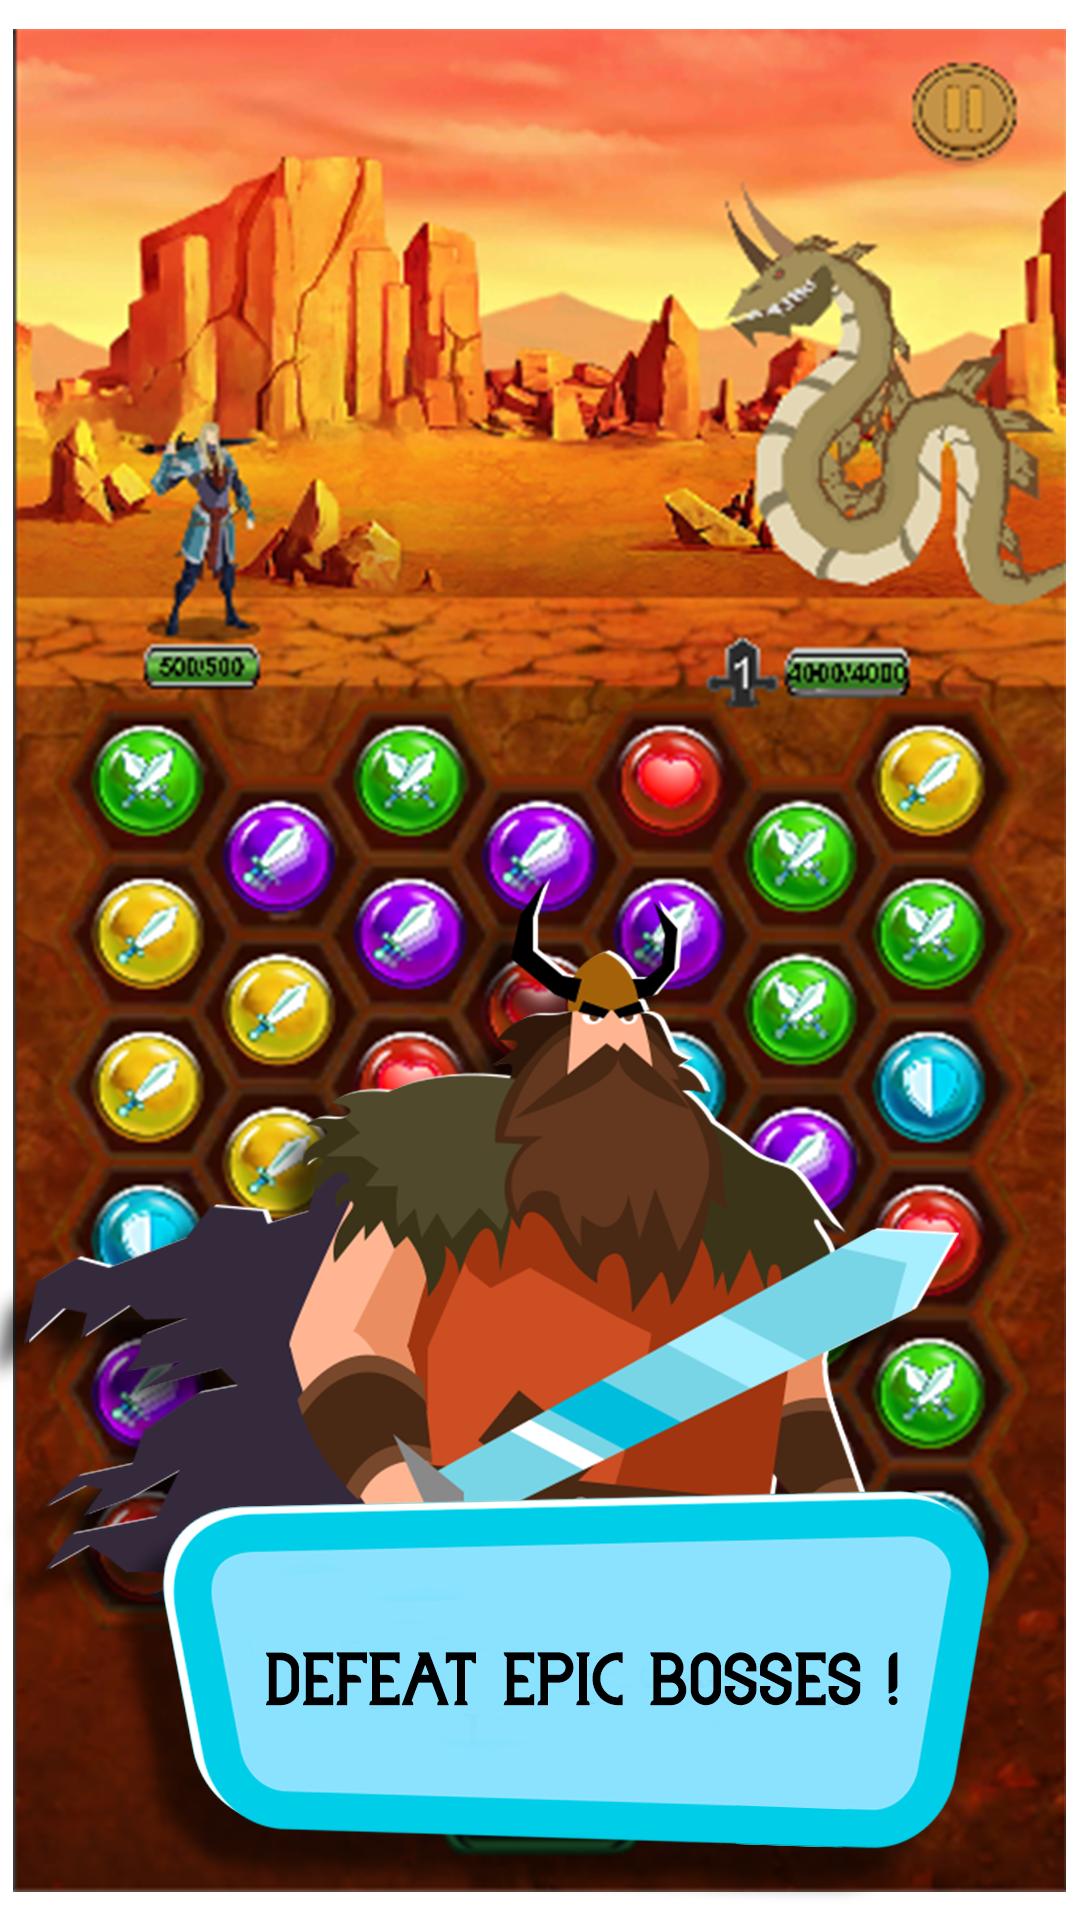 Rune Legends for Android - APK Download